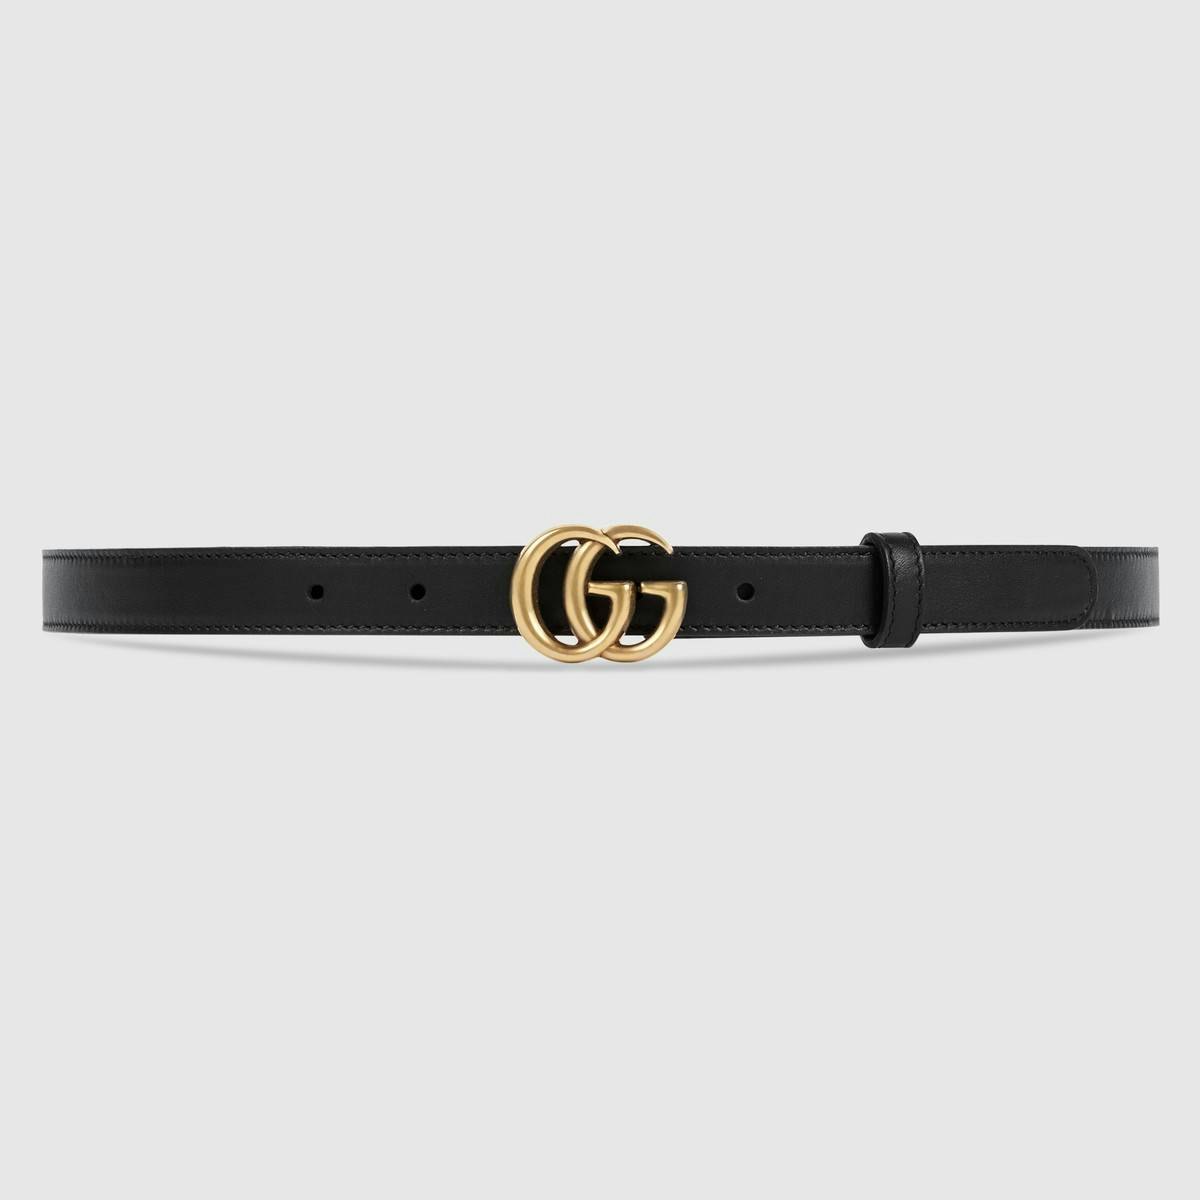 every gucci belt ever made